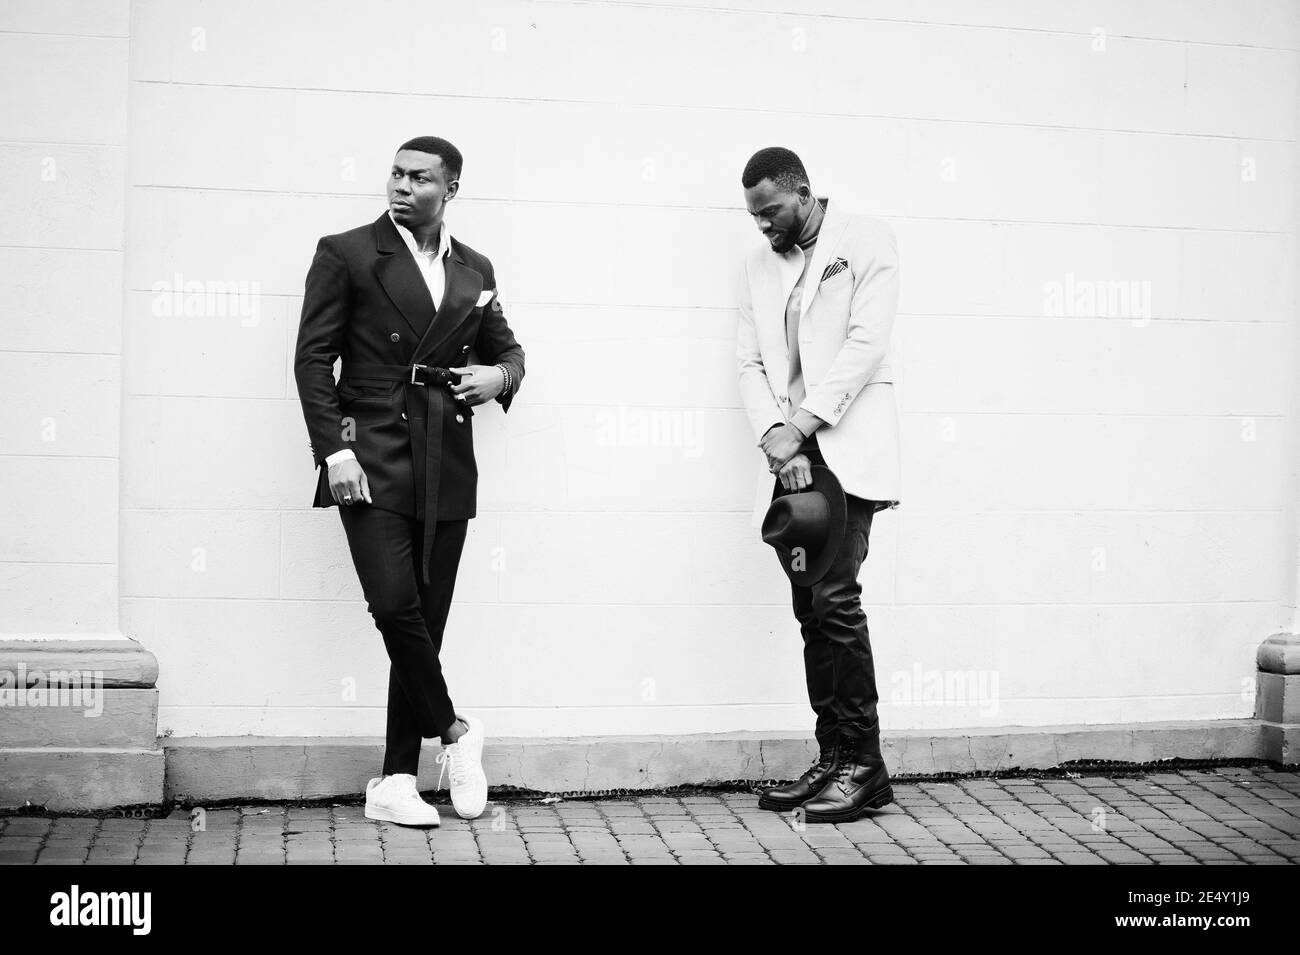 Two fashion black men. Fashionable portrait of african american male models. Wear suit, coat and hat. Stock Photo